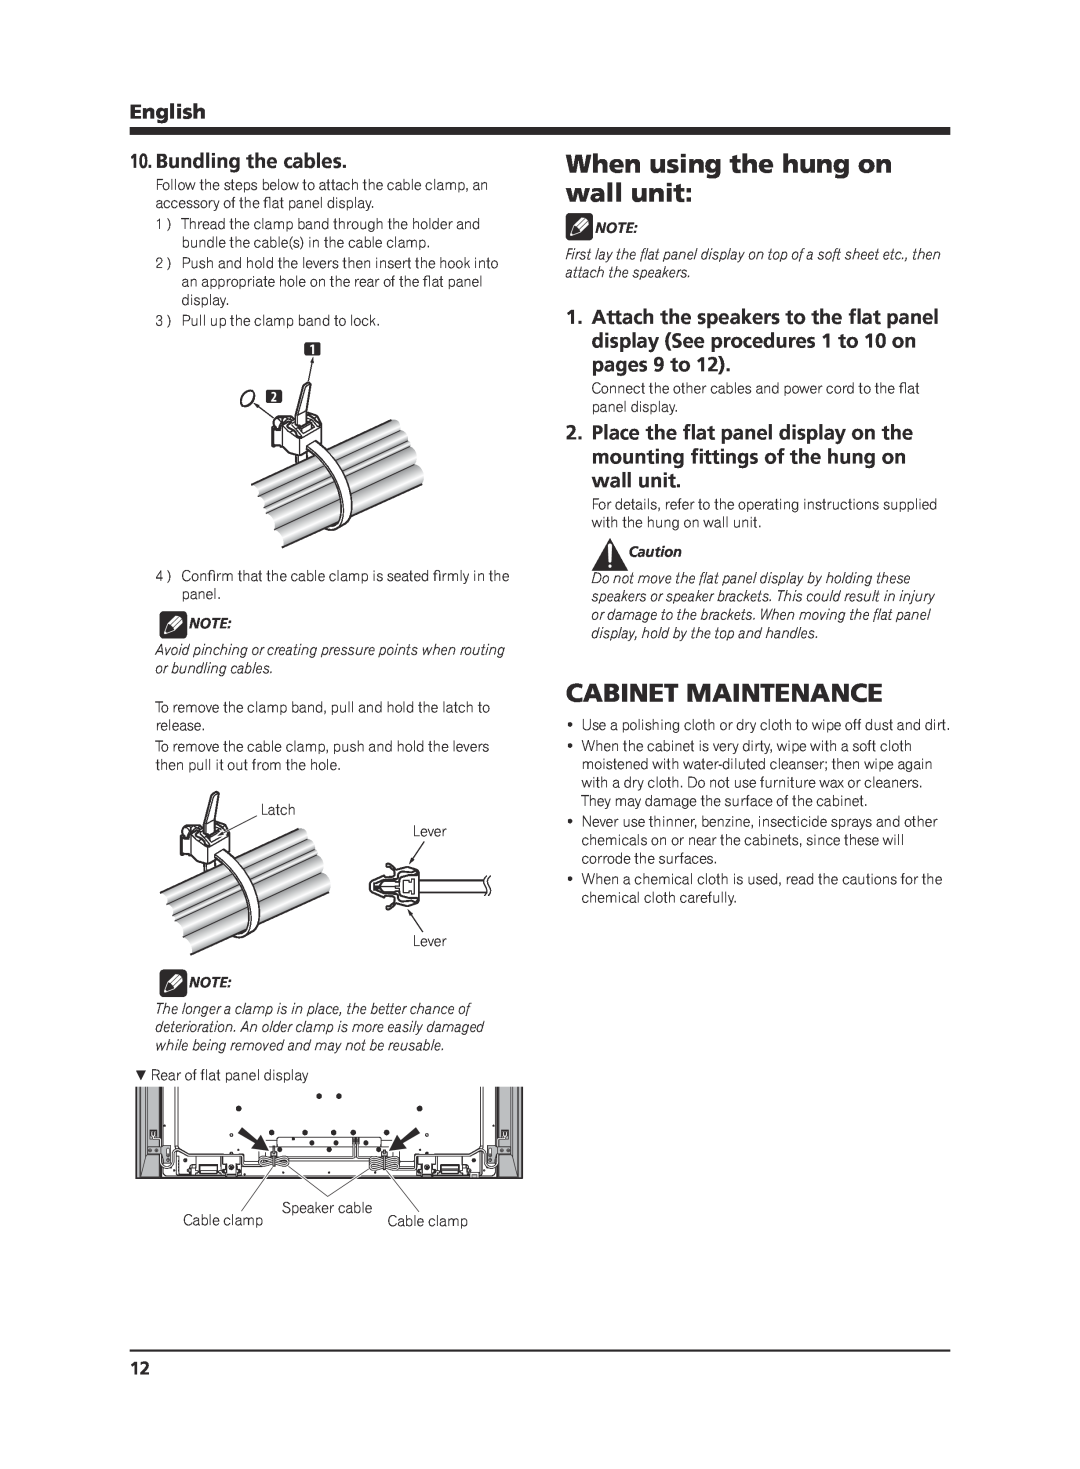 Pioneer KRP-S02 manual When using the hung on, wall unit, Cabinet Maintenance, Bundling the cables, pages 9 to, English 